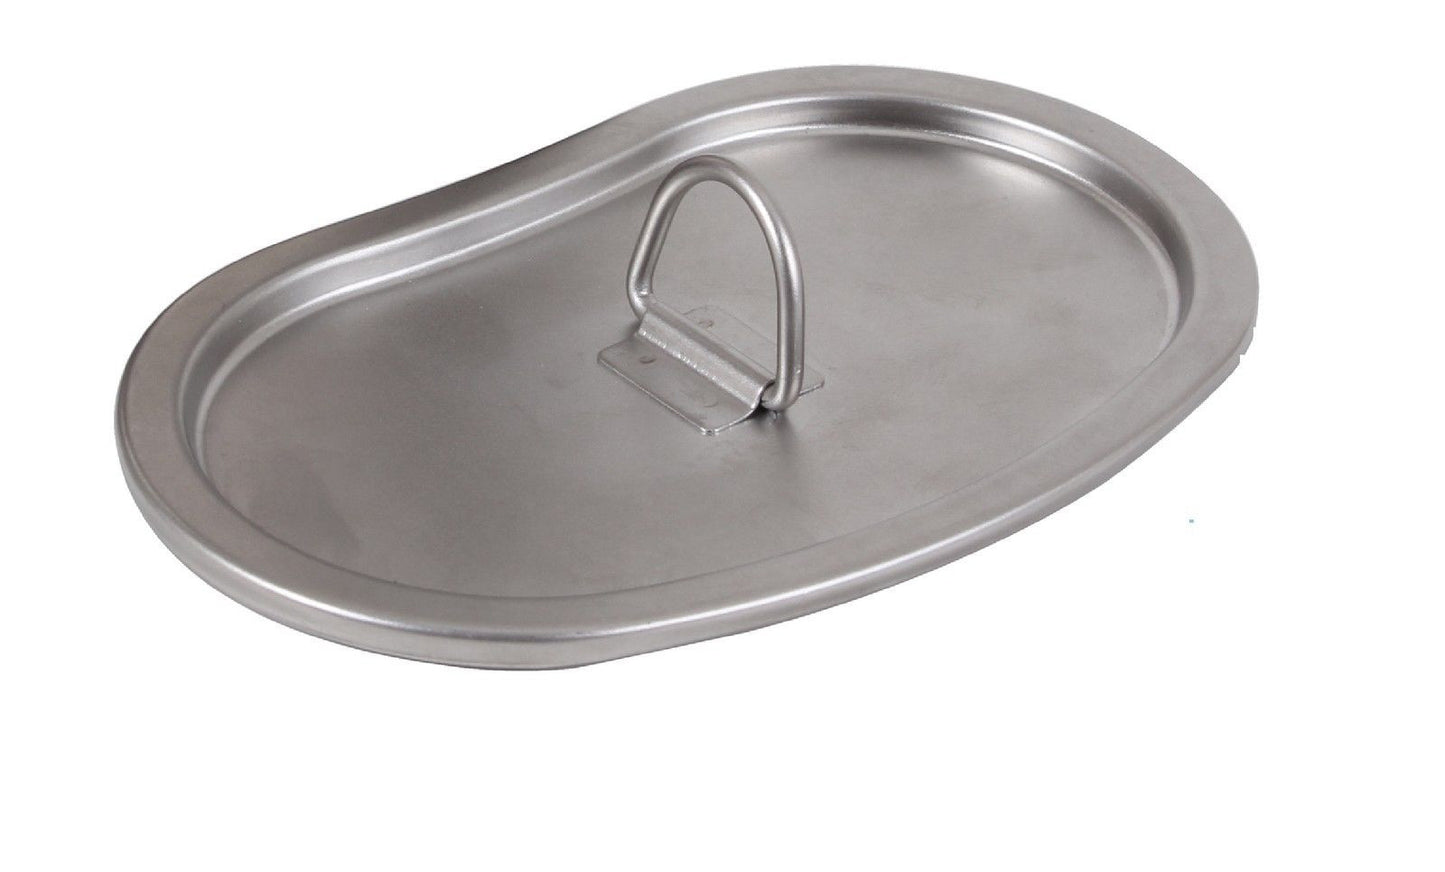 GI Style Stainless Steel Canteen Cup LID - LID ONLY - Camping Cooking Metal Lid